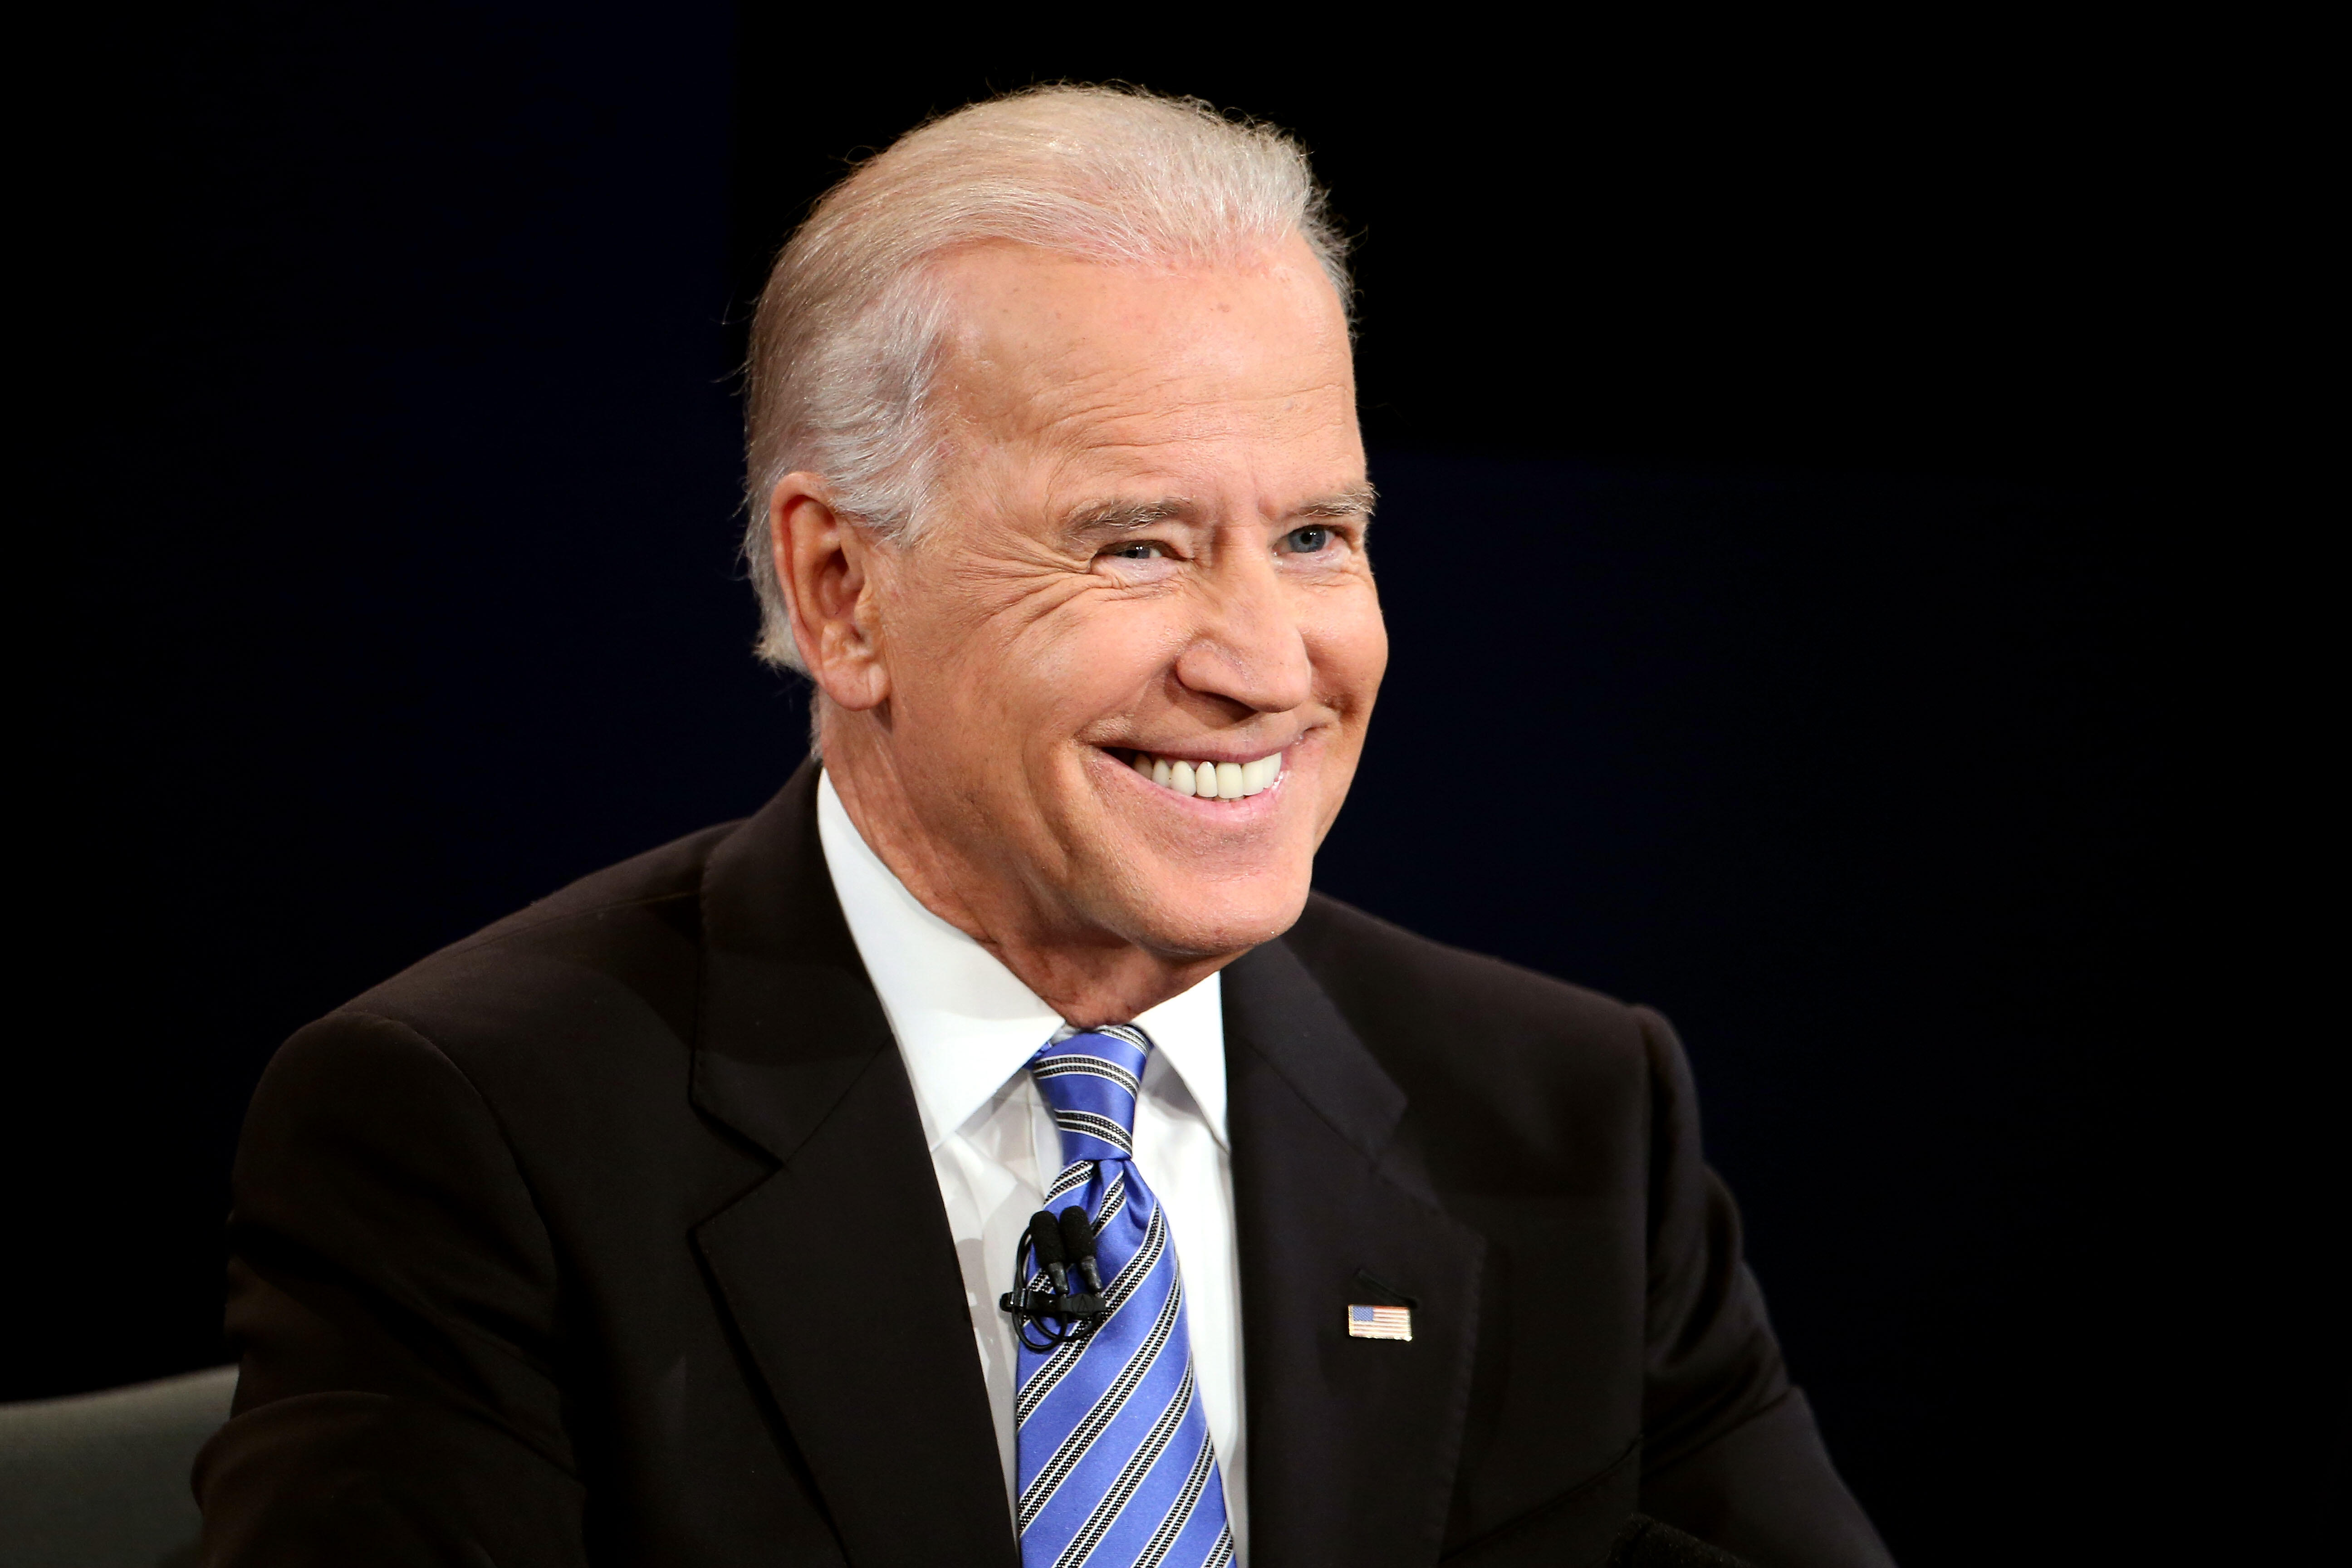 DANVILLE, KY - OCTOBER 11:  U.S. Vice President Joe Biden smiles during the vice presidential debate at Centre College October 11, 2012 in Danville, Kentucky.  This is the second of four debates during the presidential election season and the only debate 